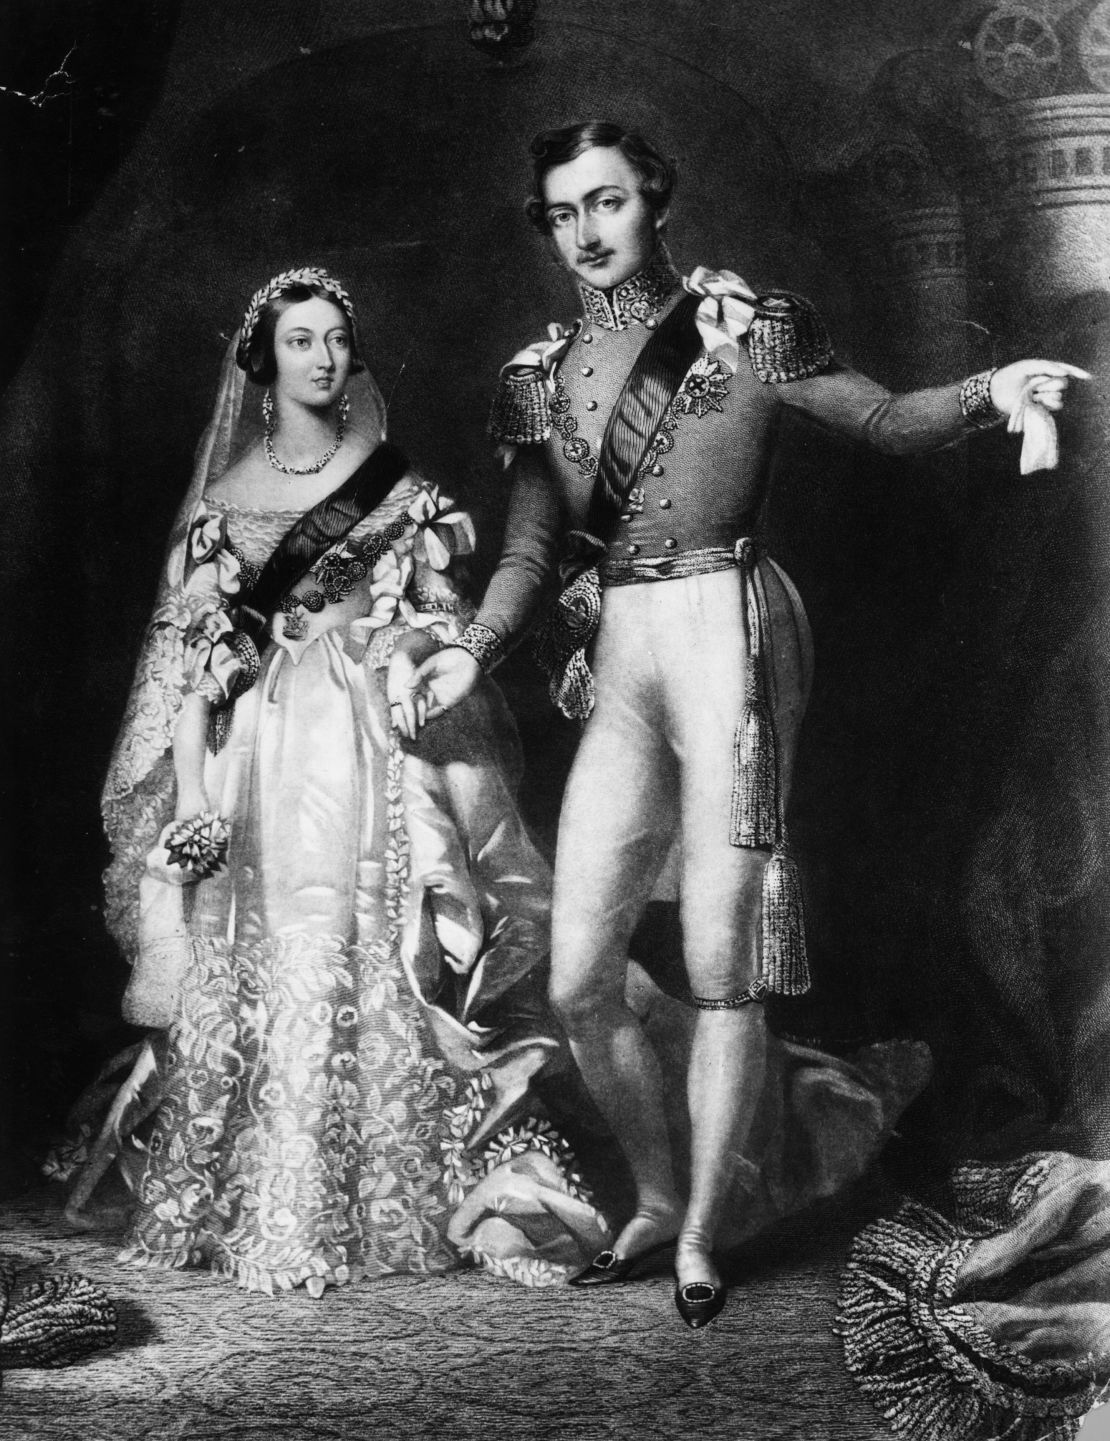 An illustration of Queen Victoria and Prince Albert on their return from the marriage service at St. James's Palace in London.